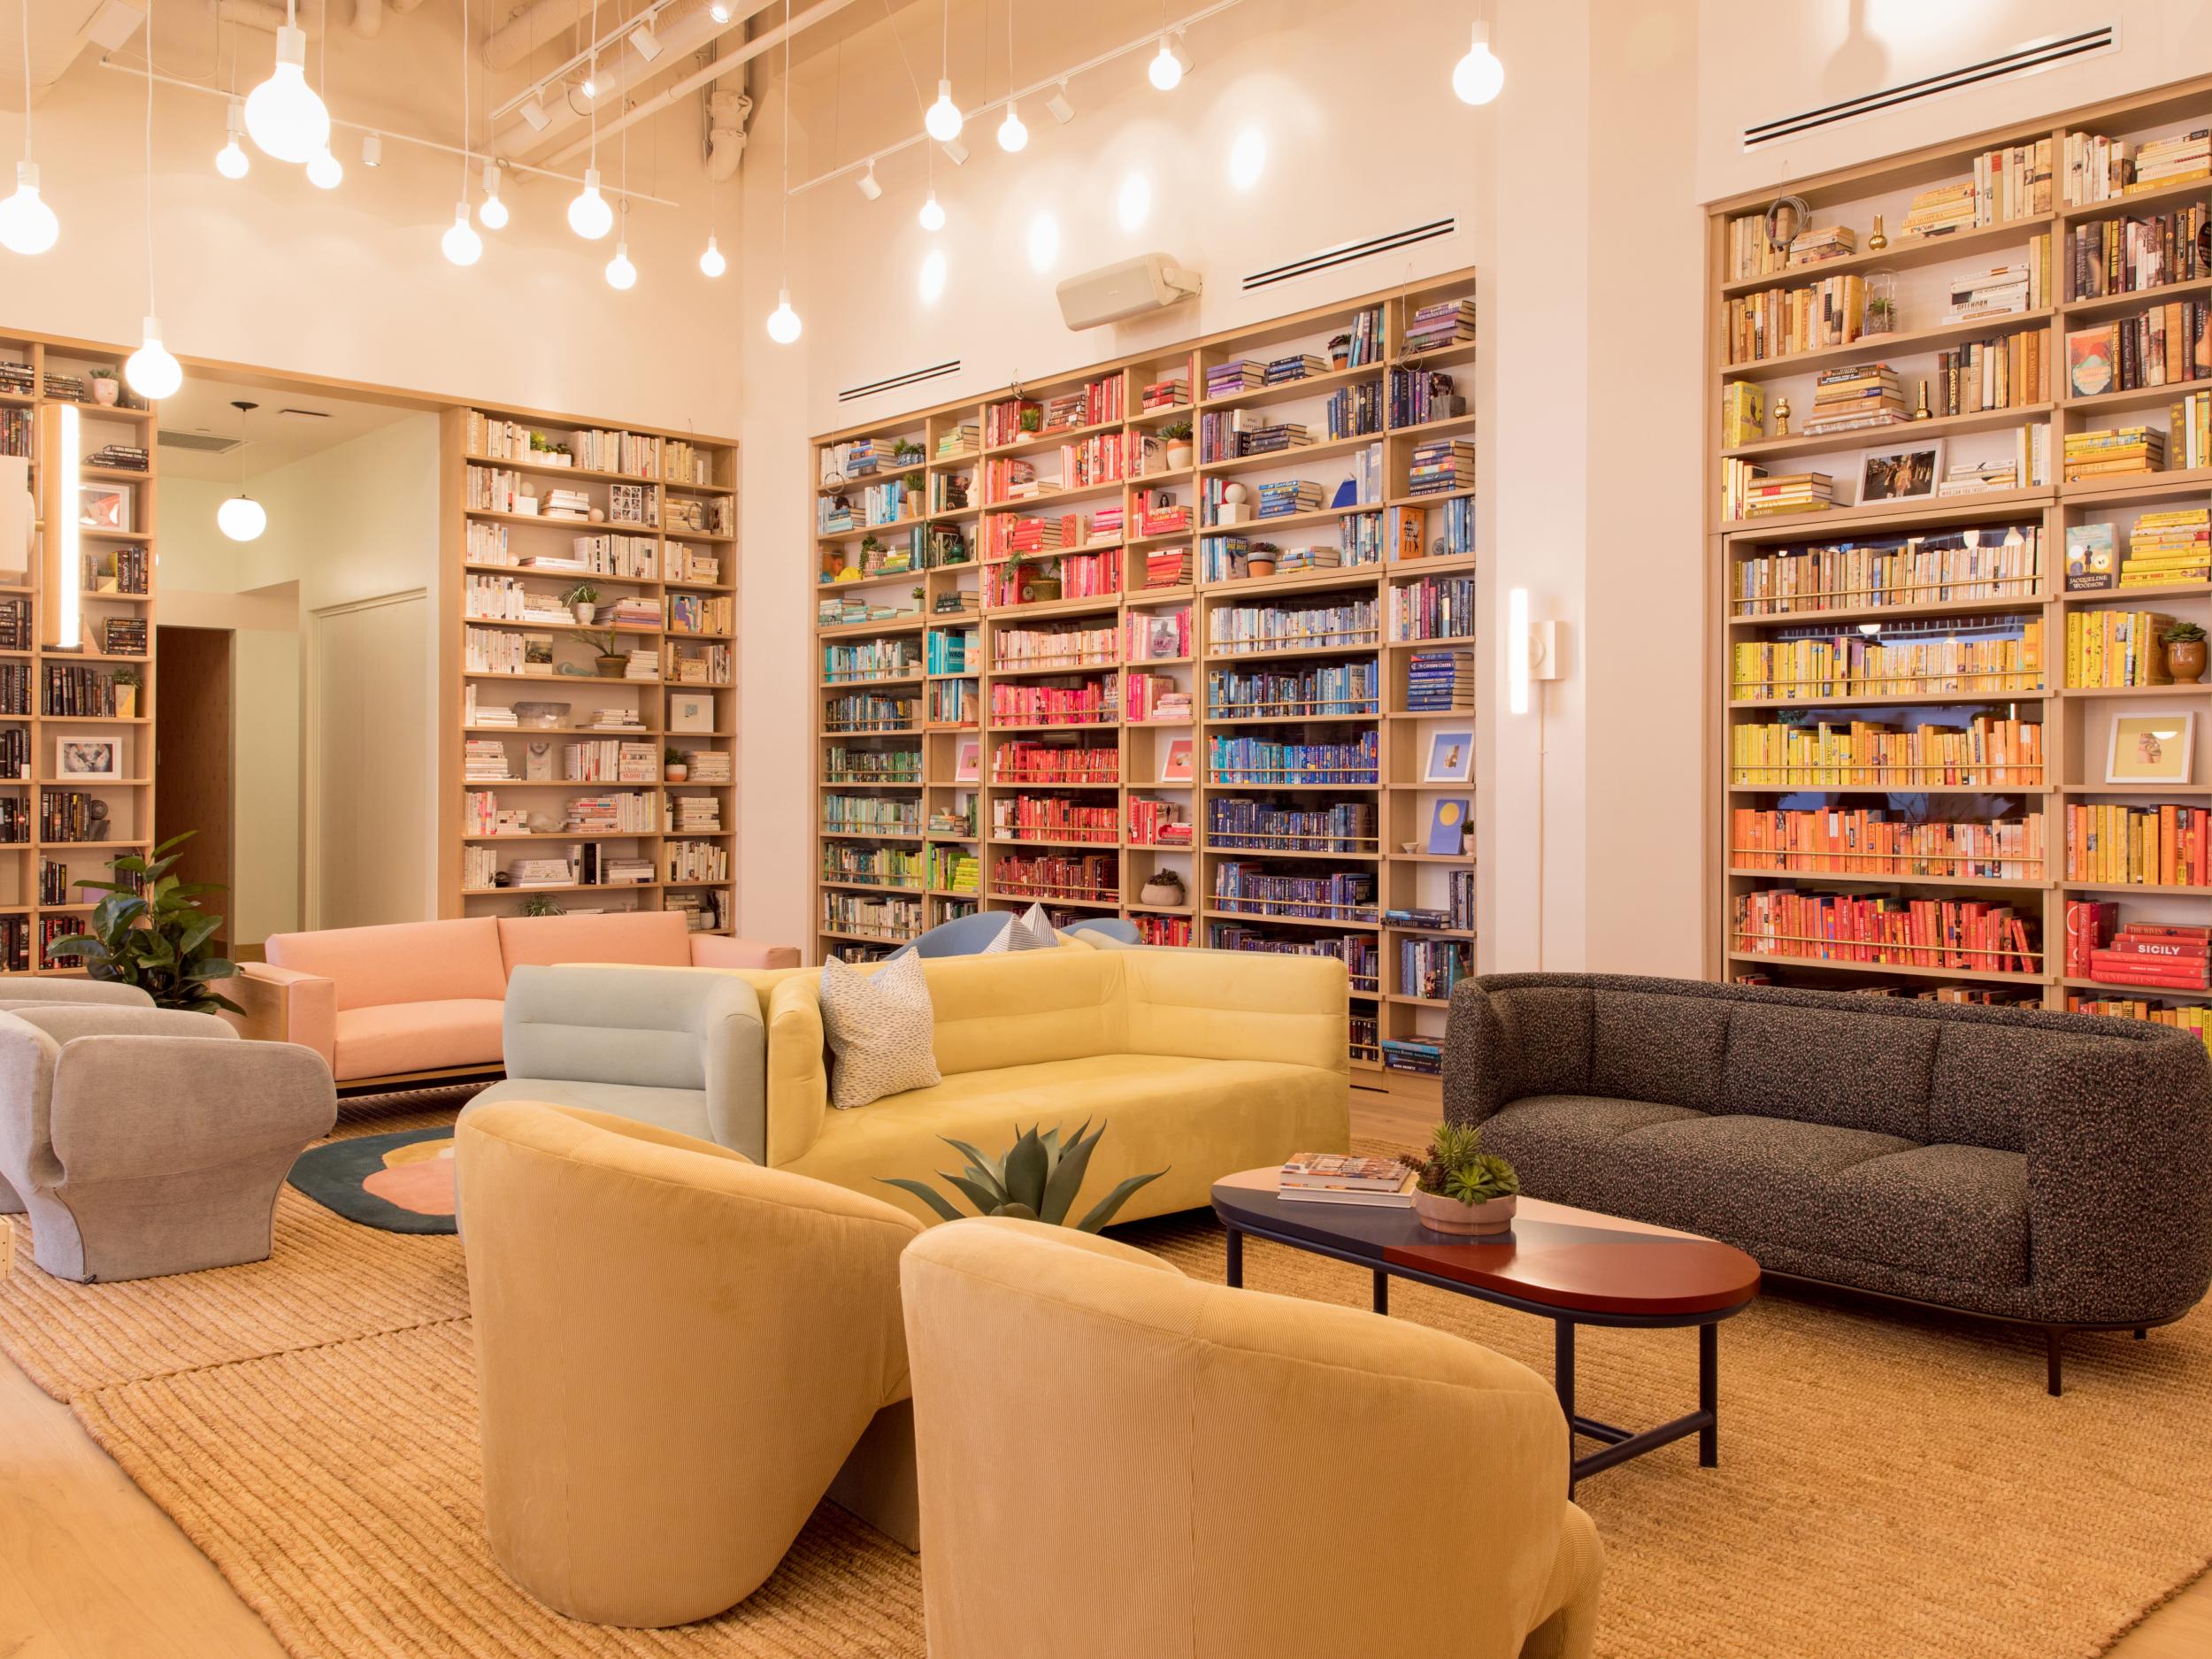 The Wing coworking space organises books by spine colour, a very Instagram-friendly design